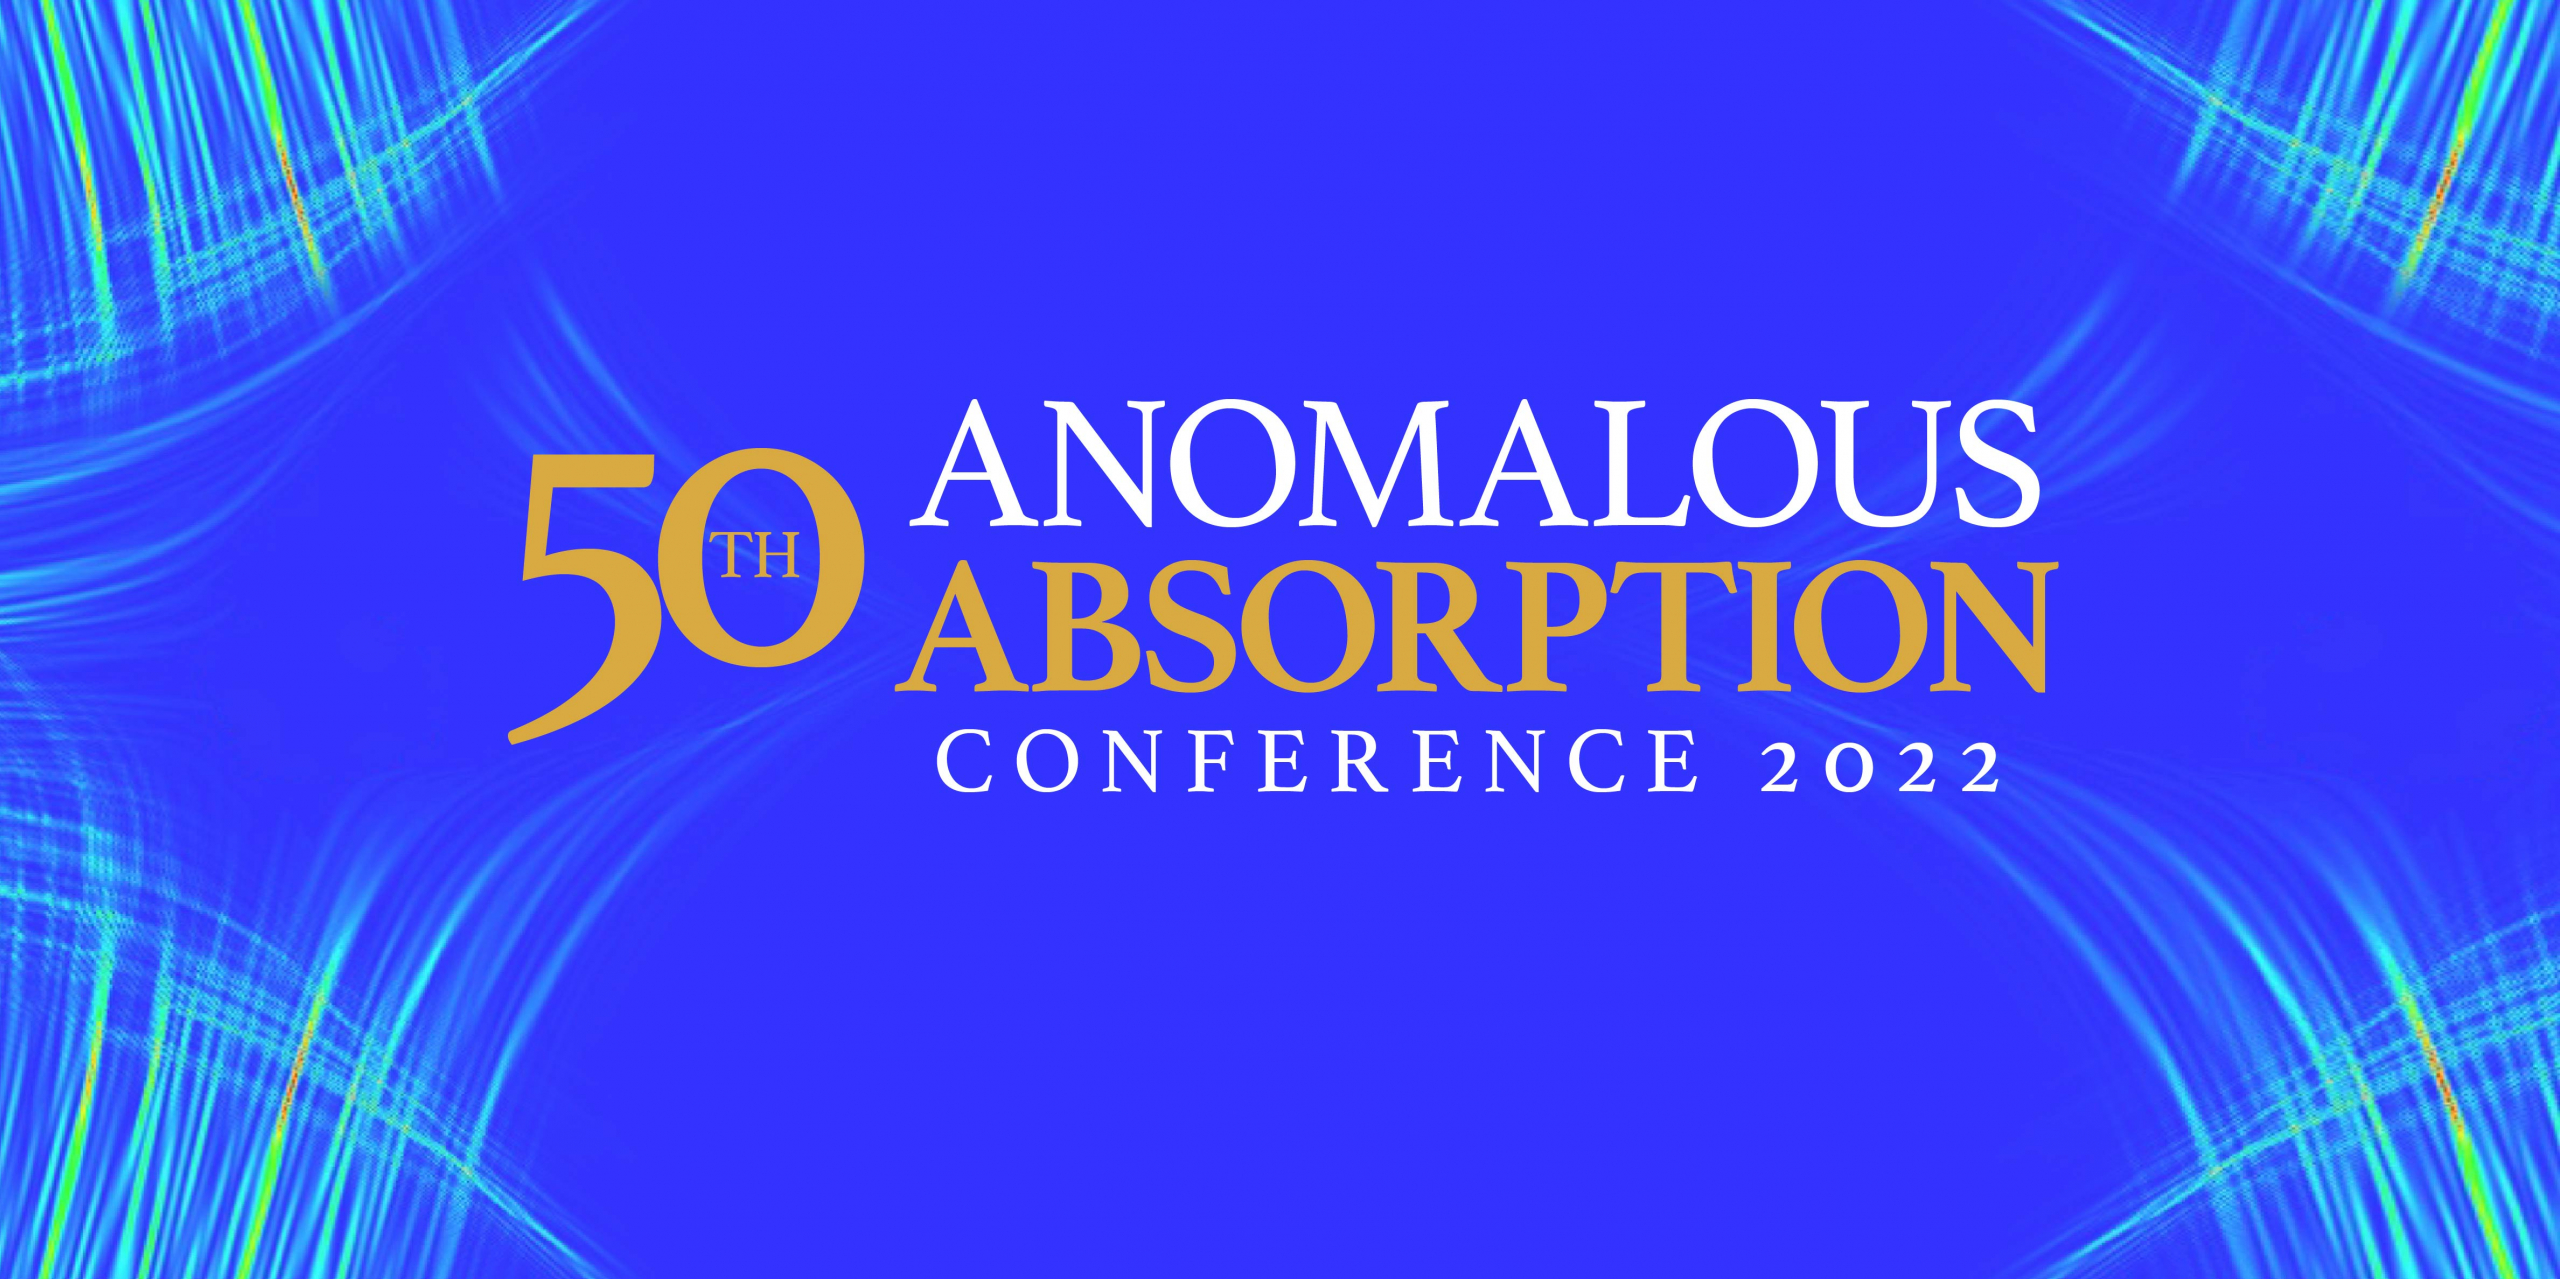 50th Anomalous Absorption Conference 2022 logo.